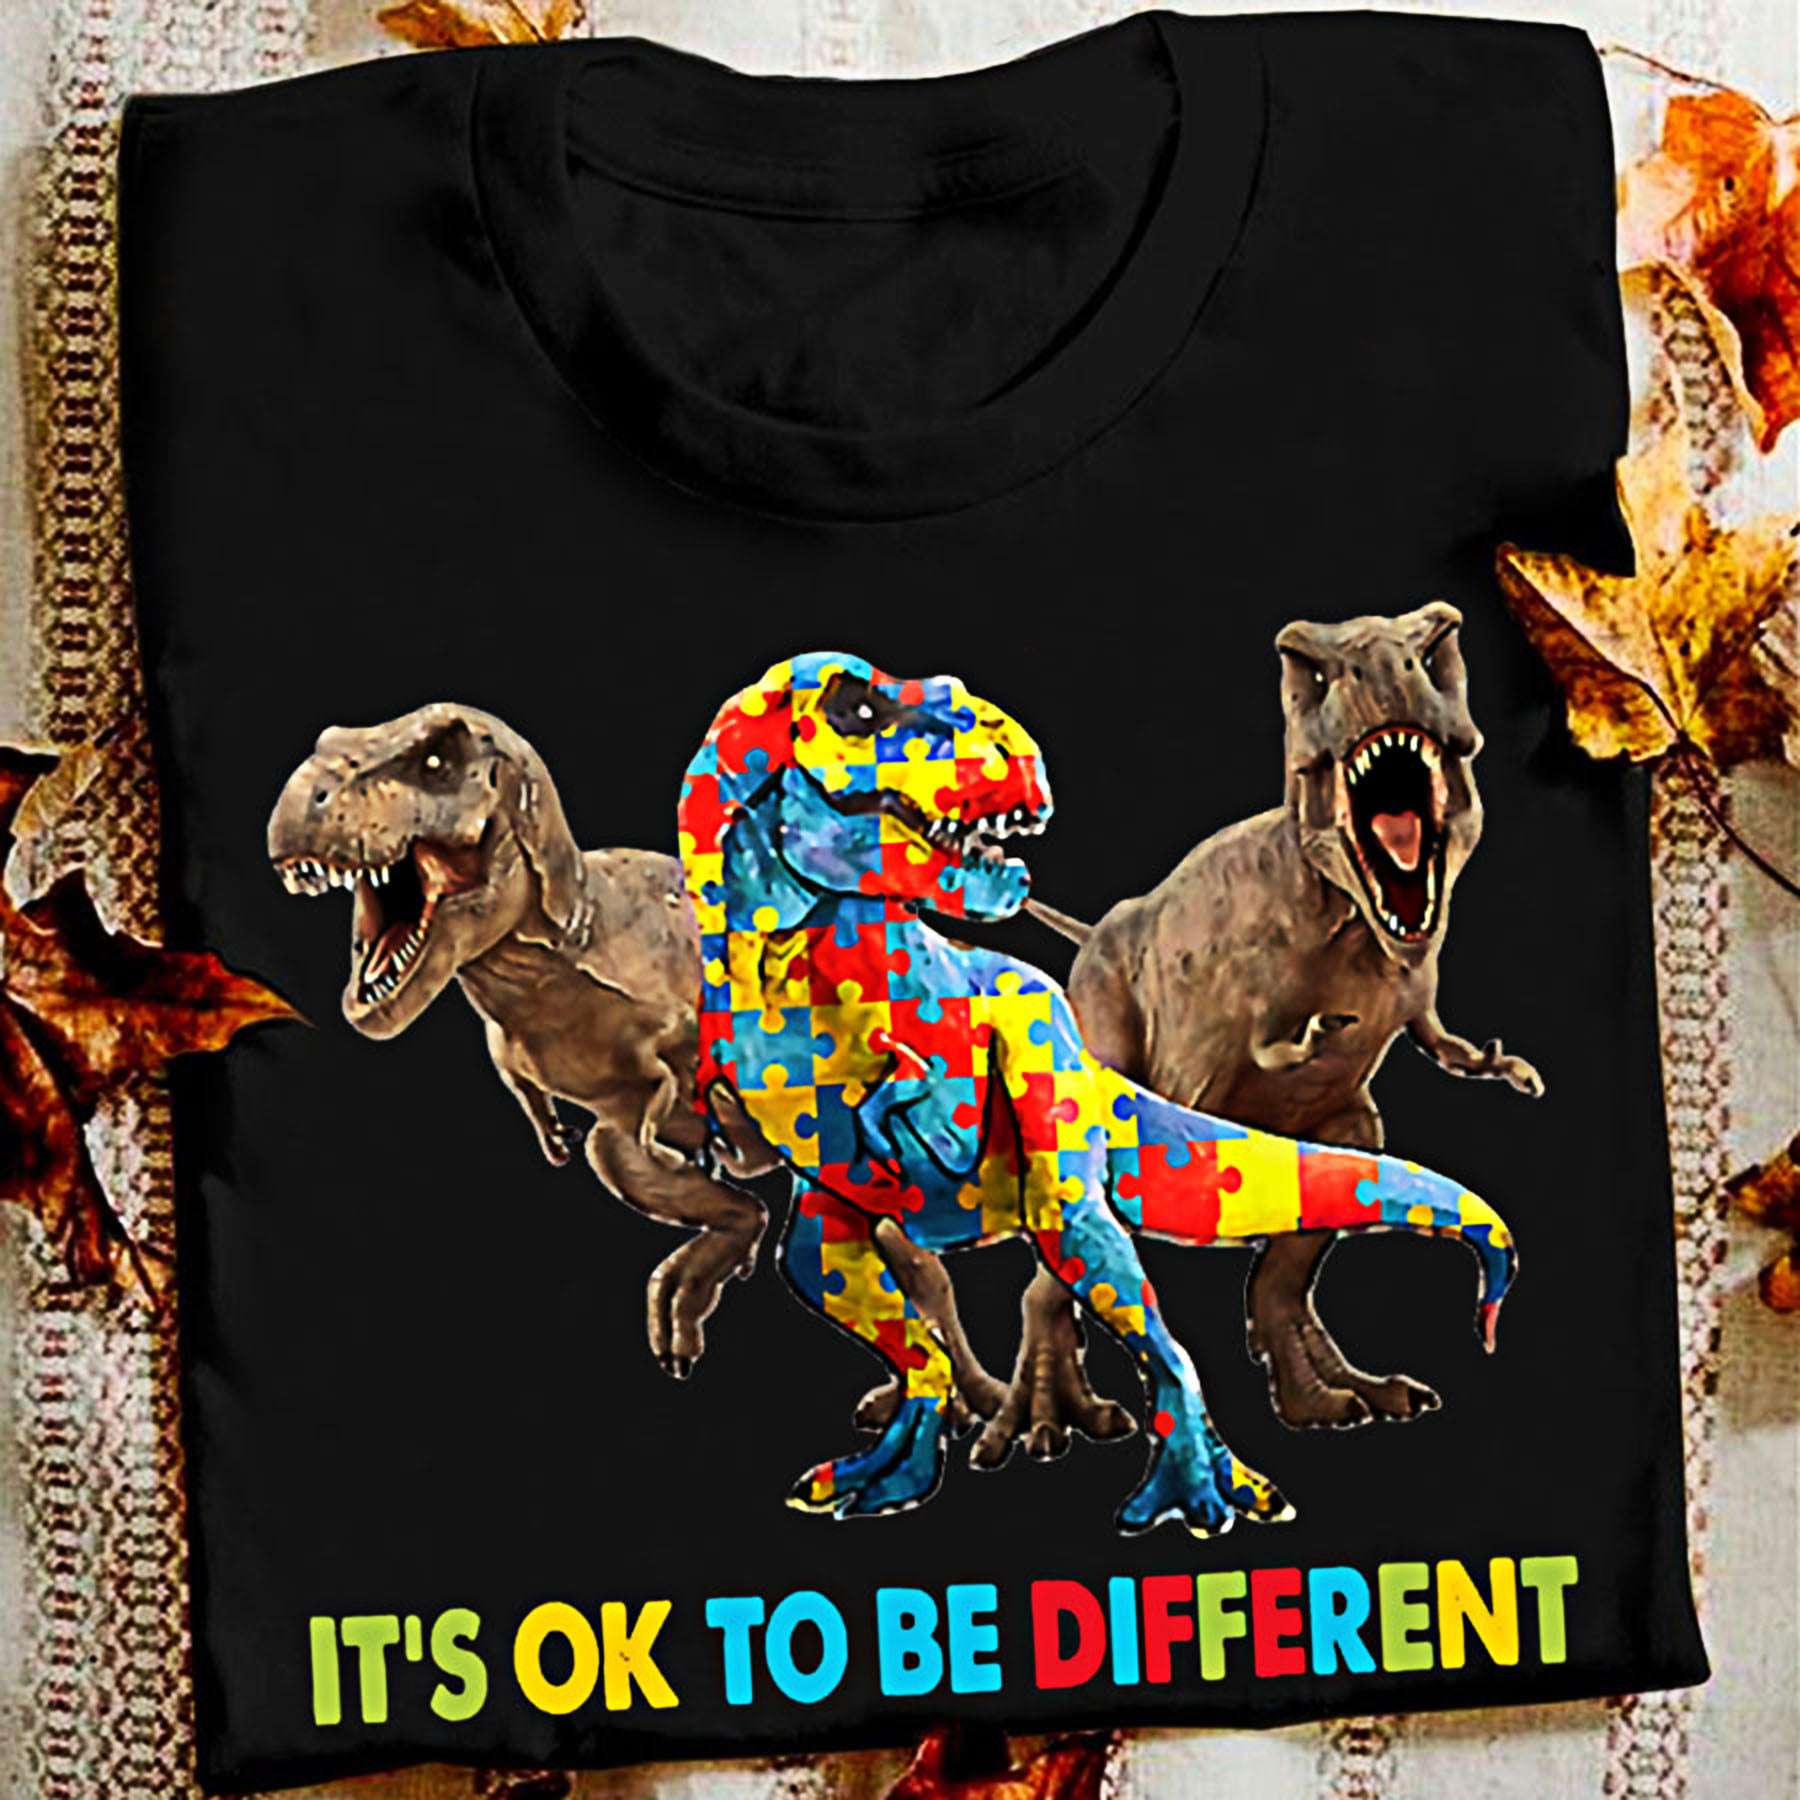 It's ok to be different - T-rex dinosaur, autism awareness